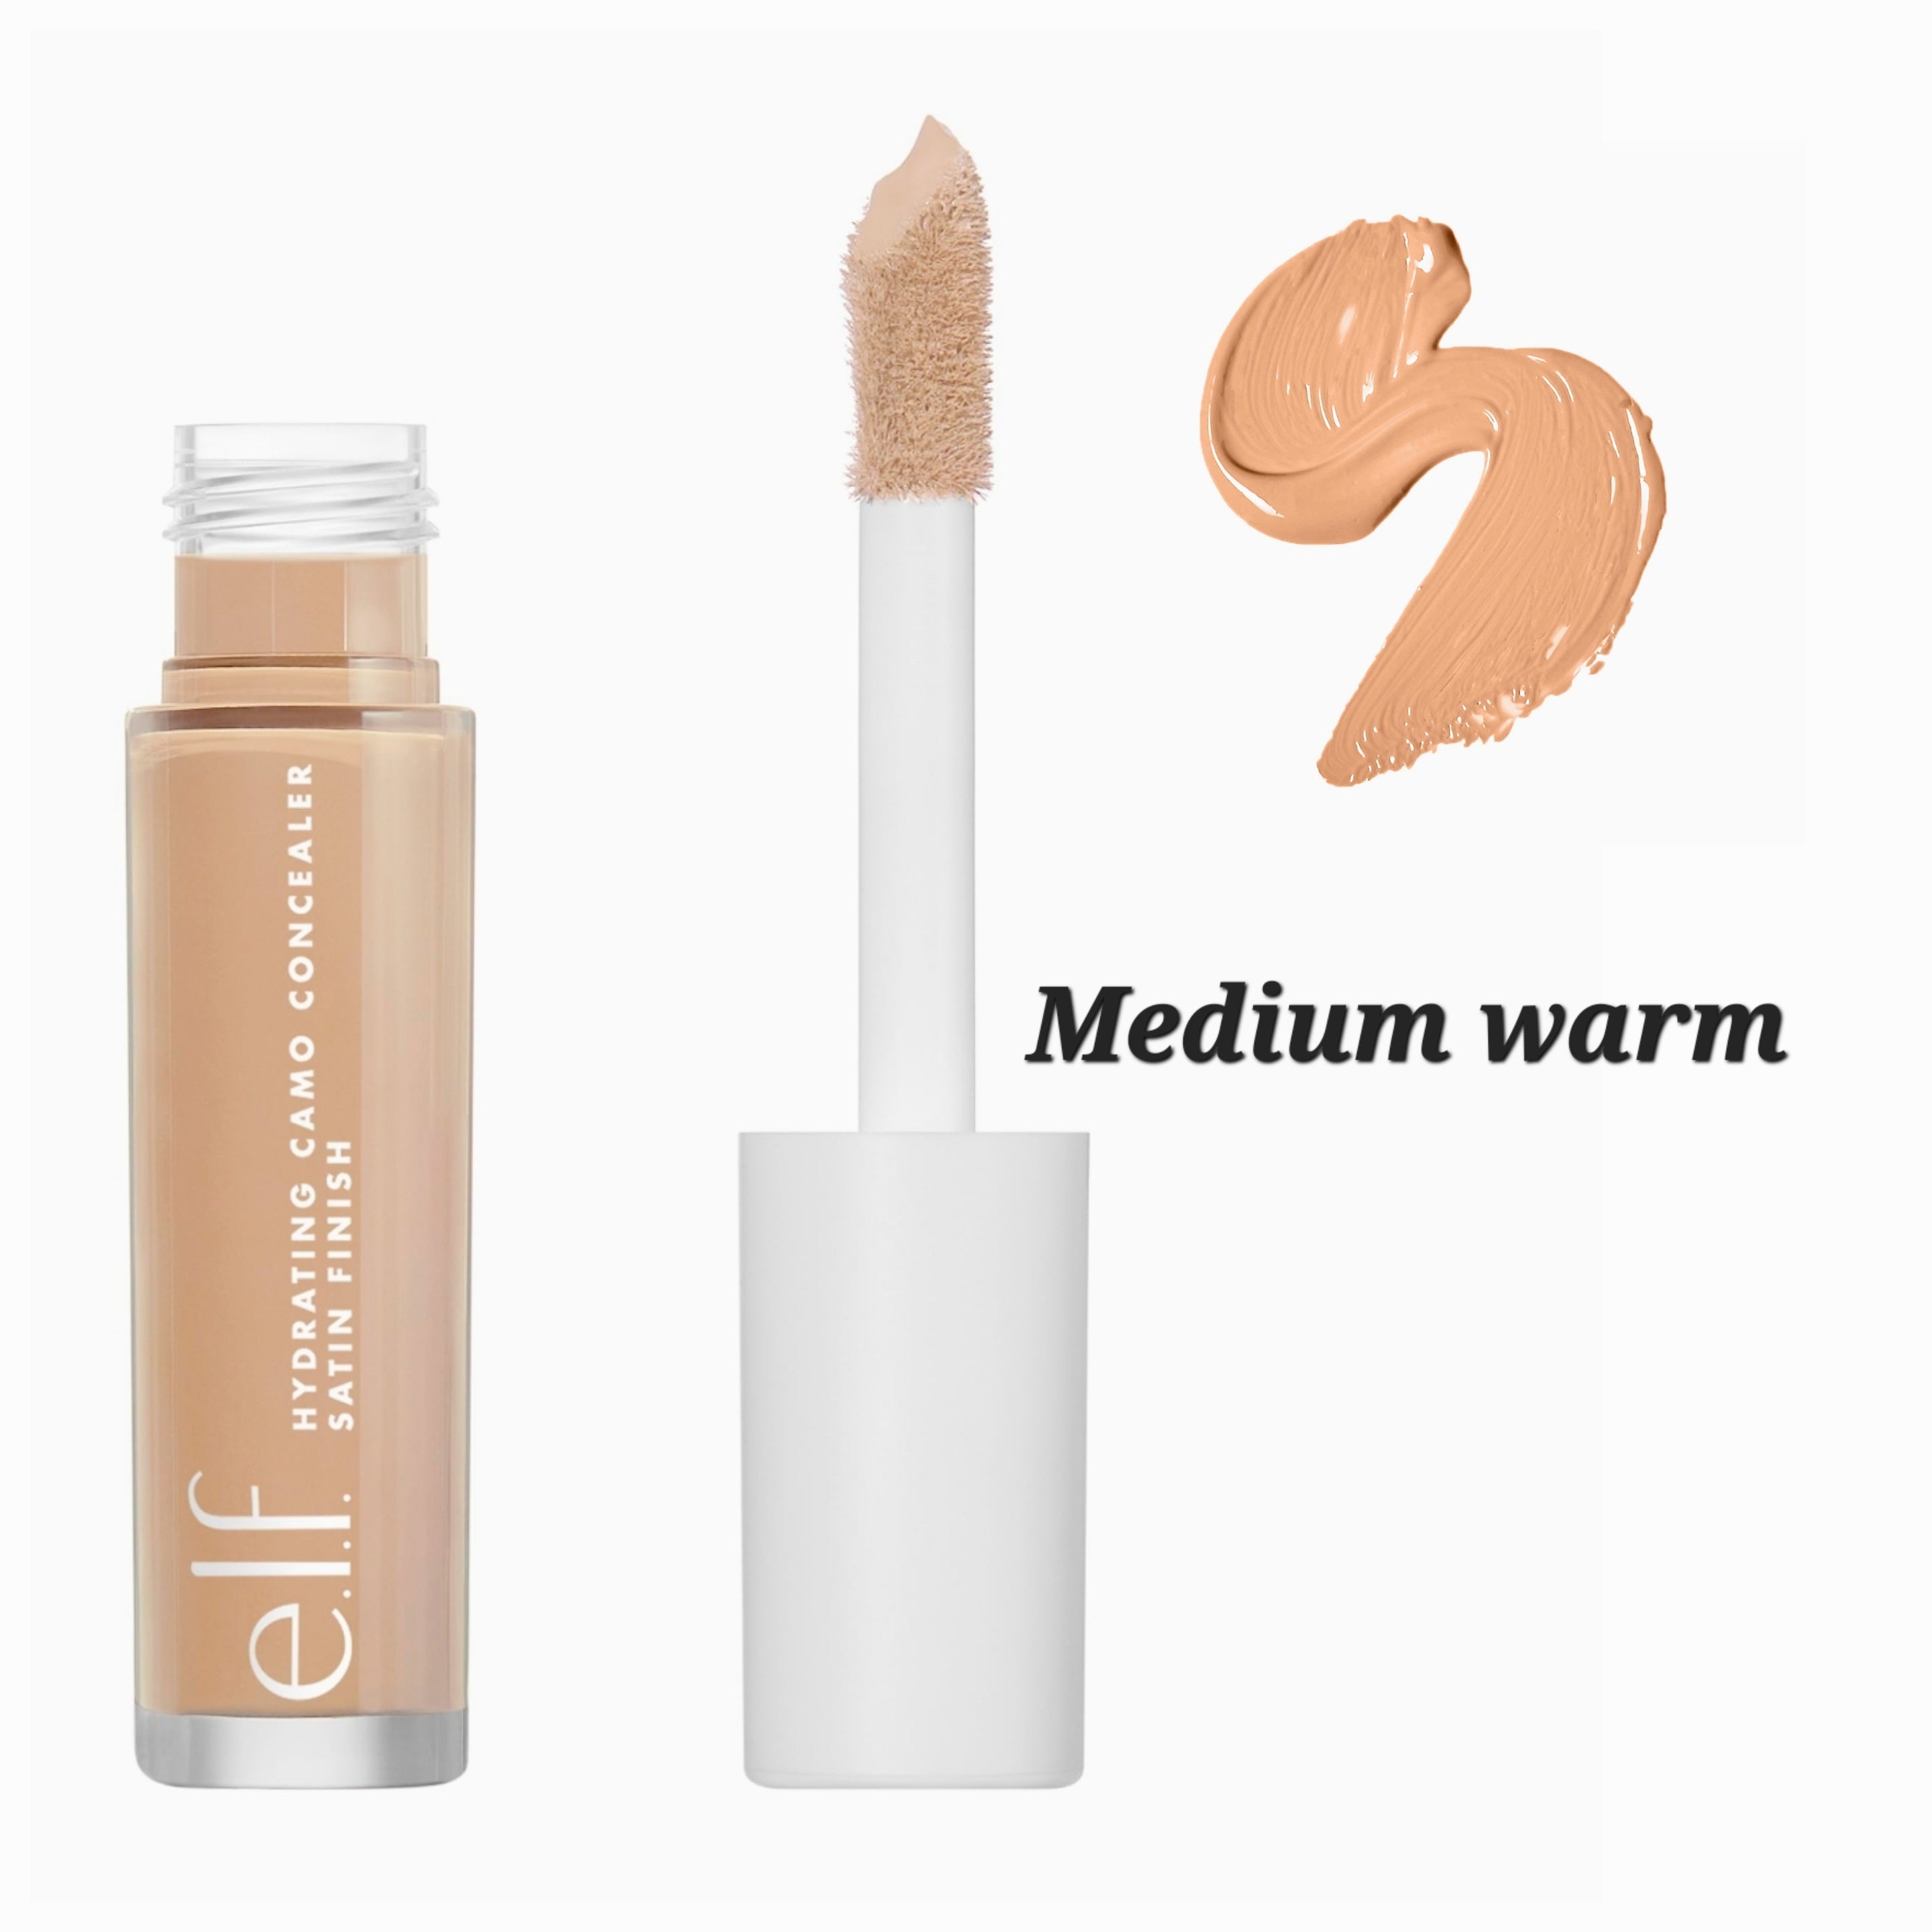 e.l.f., Hydrating Camo Concealer, Lightweight, Full Coverage, Long Lasting, Conceals, Corrects, Covers, Hydrates, Highlights, Satin Finish